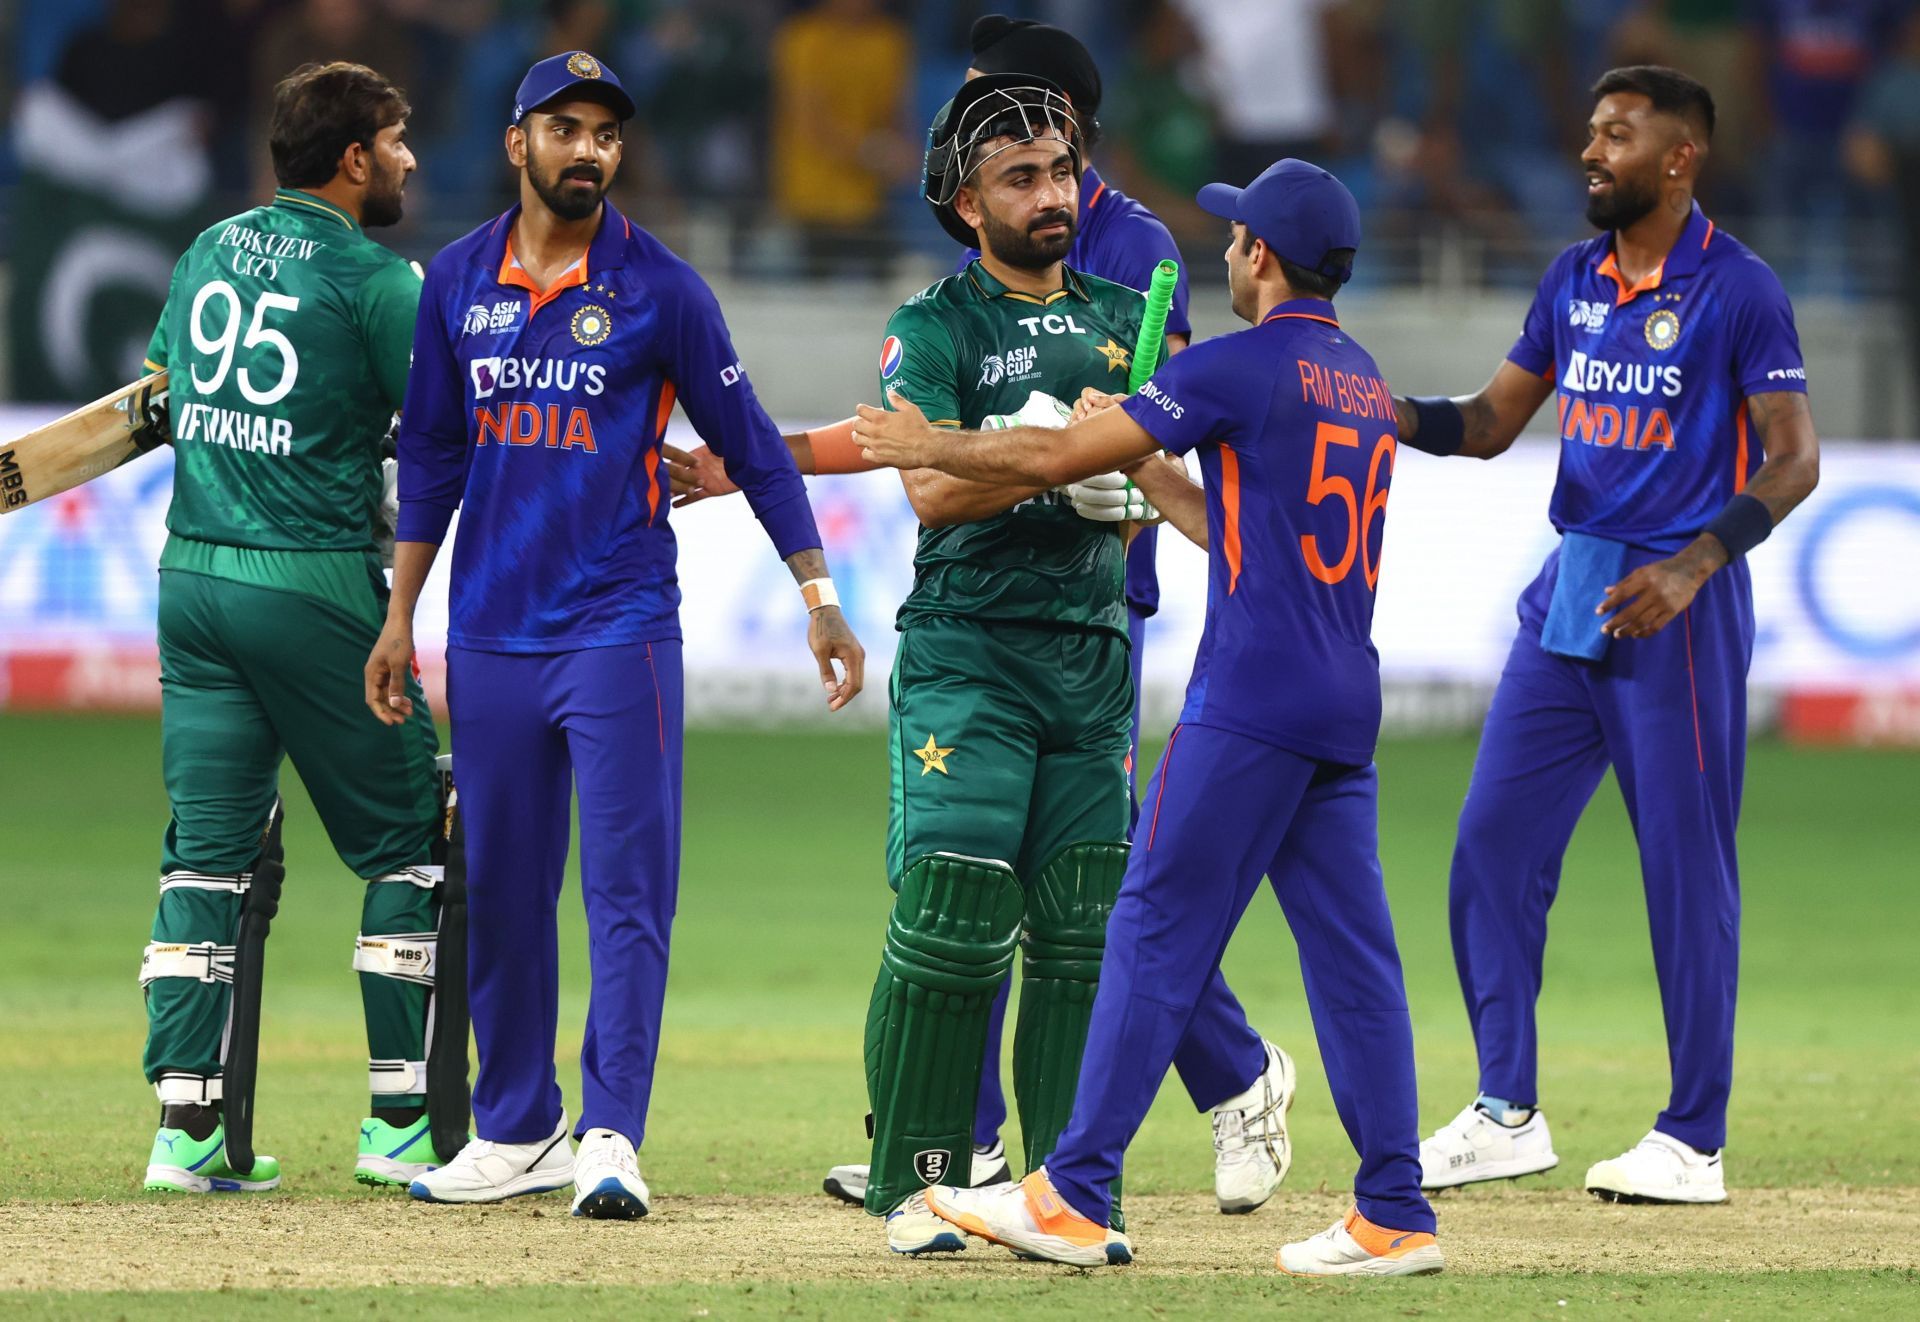 India and Pakistan players after the Super 4 match in the Asia Cup. Pic: Getty Images